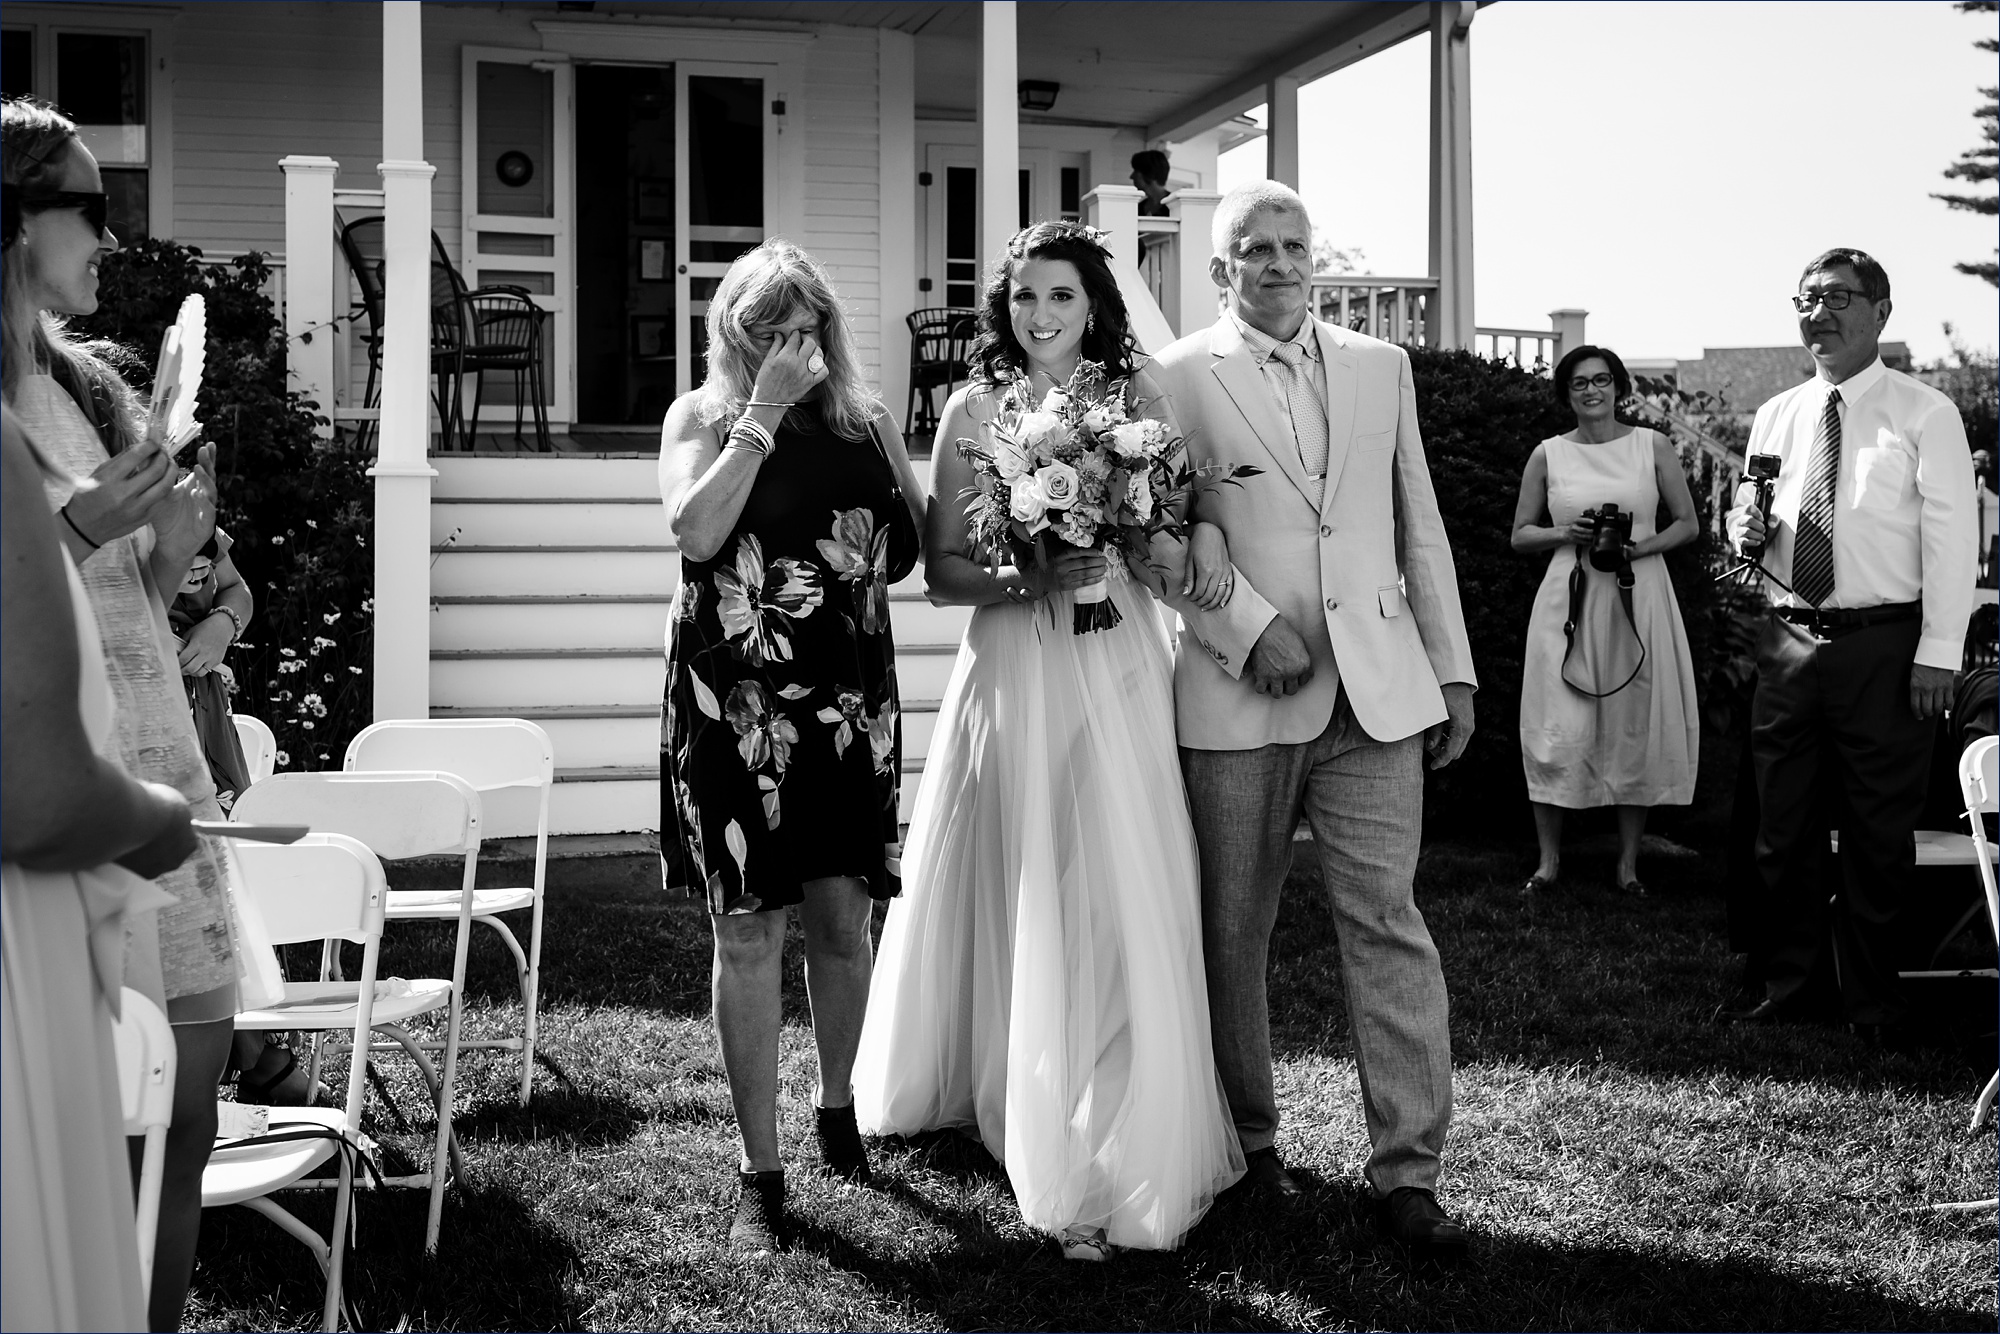 The bride and her teary mom and dad walk her down the aisle at her southern Maine wedding